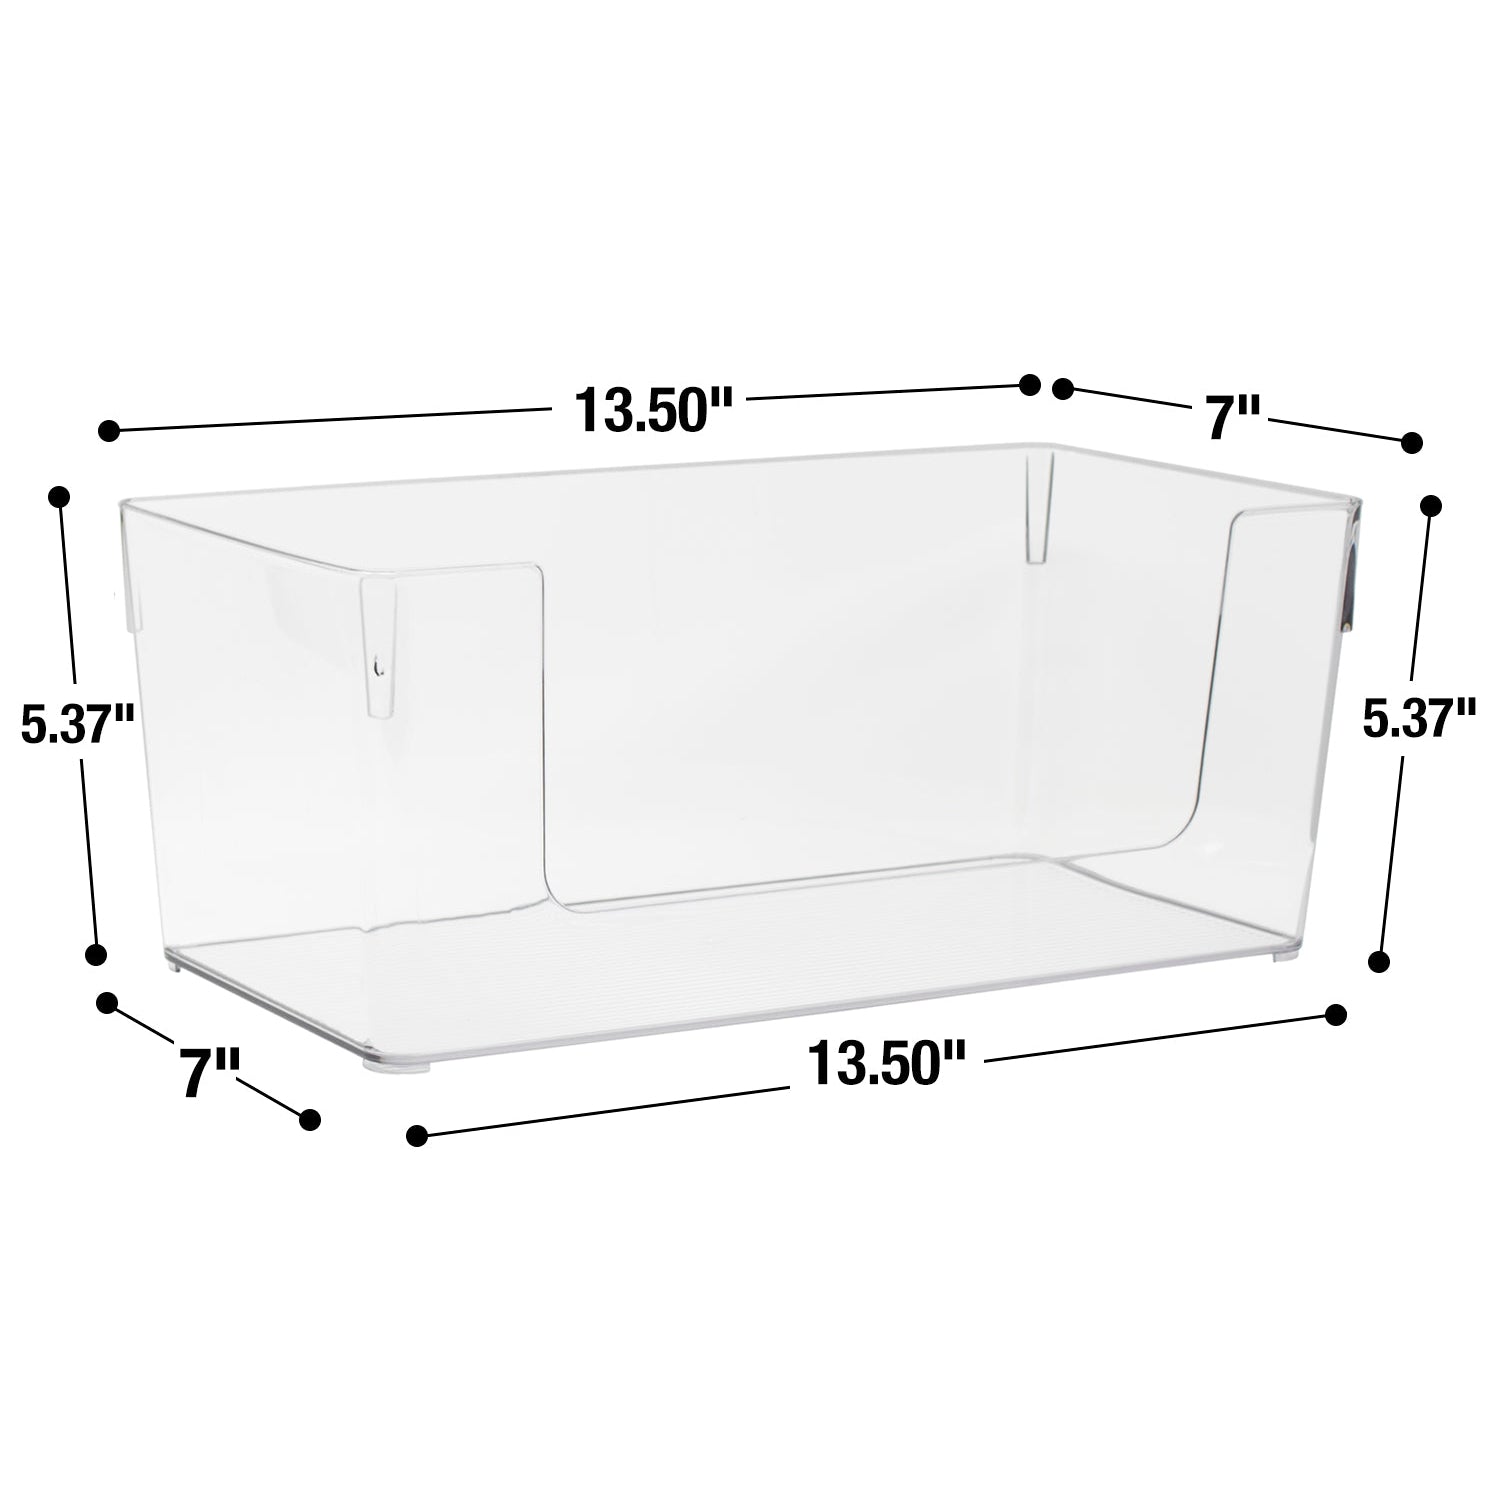 Clear Open Front Container Bin Set (Large Rectangle)